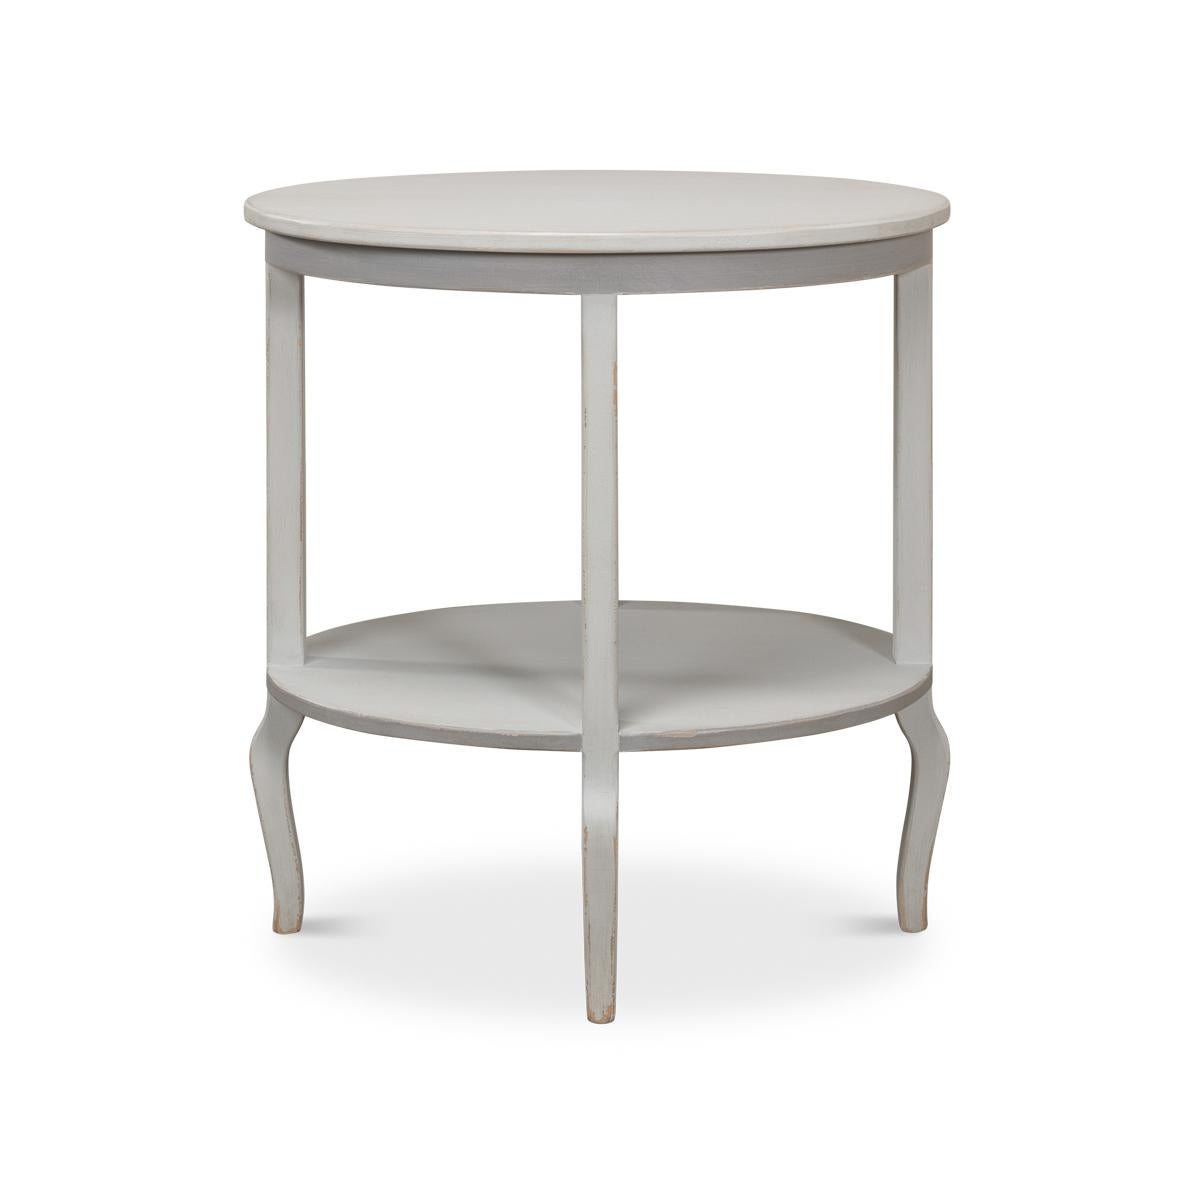 Painted Oval Side Table with straight lines and curved legs.
Add provincial flair with the slightly distressed and antiqued gray painted side table.
Dimensions: 29